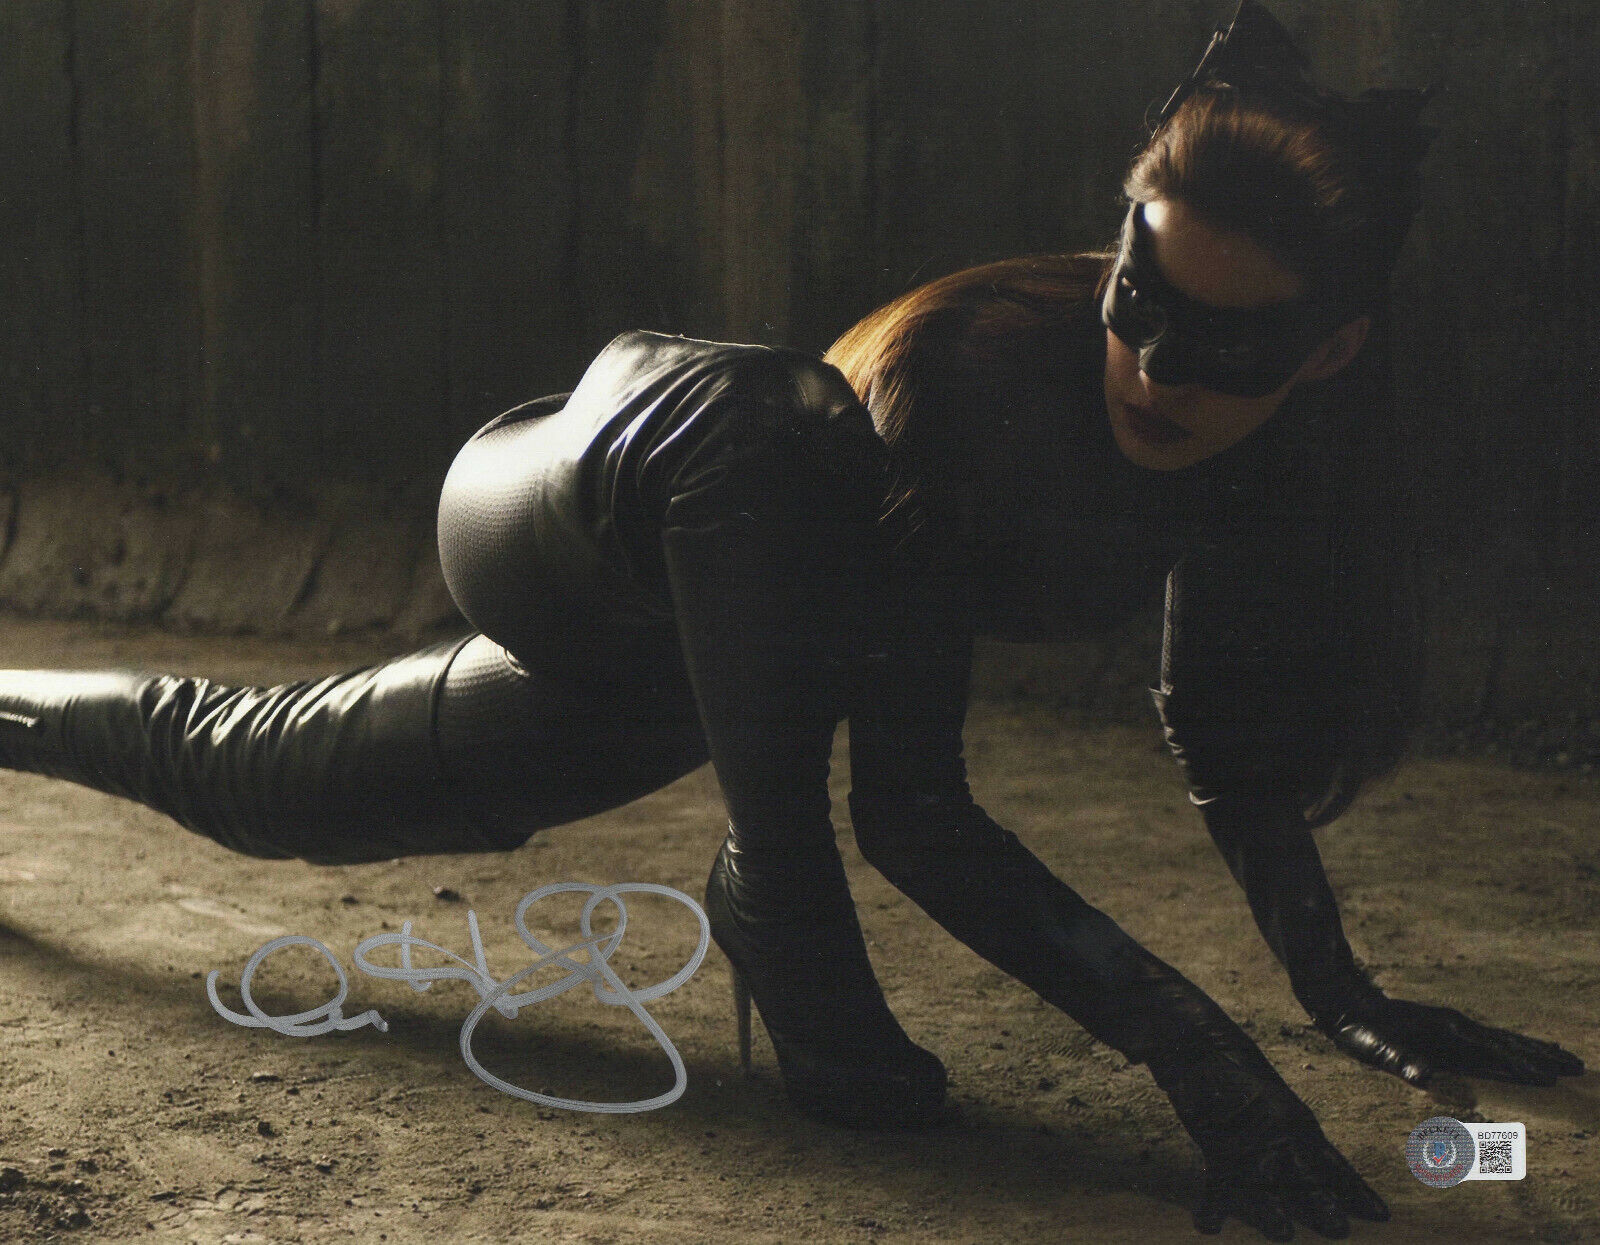 ANNE HATHAWAY SIGNED AUTOGRAPH THE DARK KNIGHT RISES 11X14 PHOTO BAS BECKETT